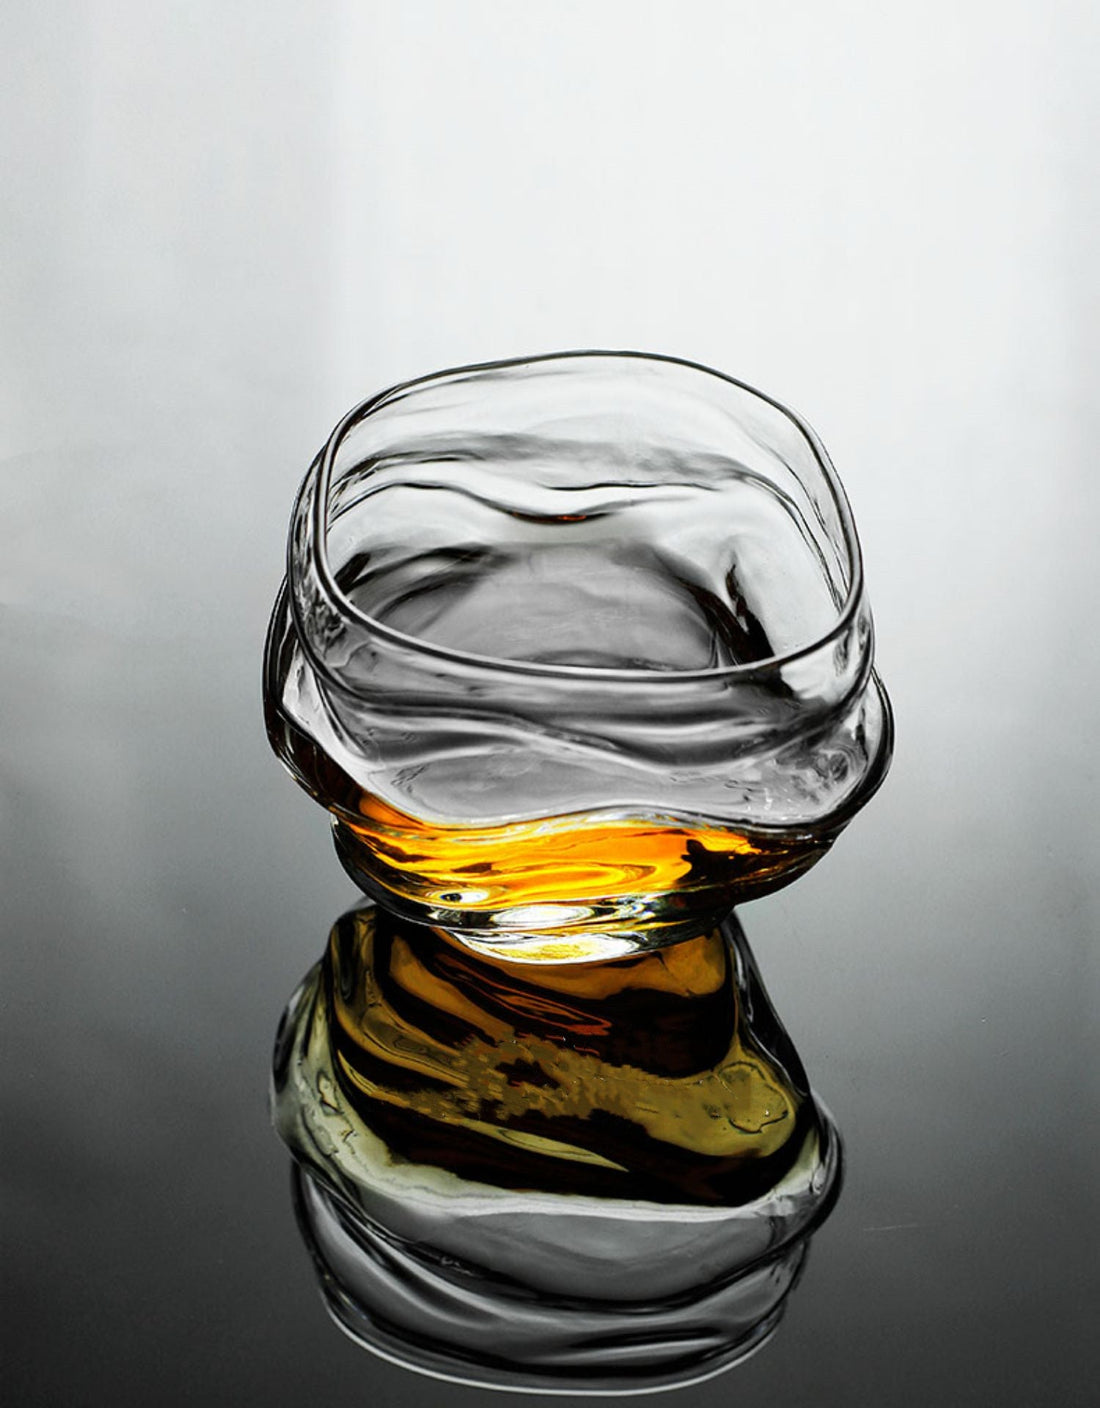 Exquisite Craftsmanship: The Renaissance of Japanese Crystal Whiskey Glasses